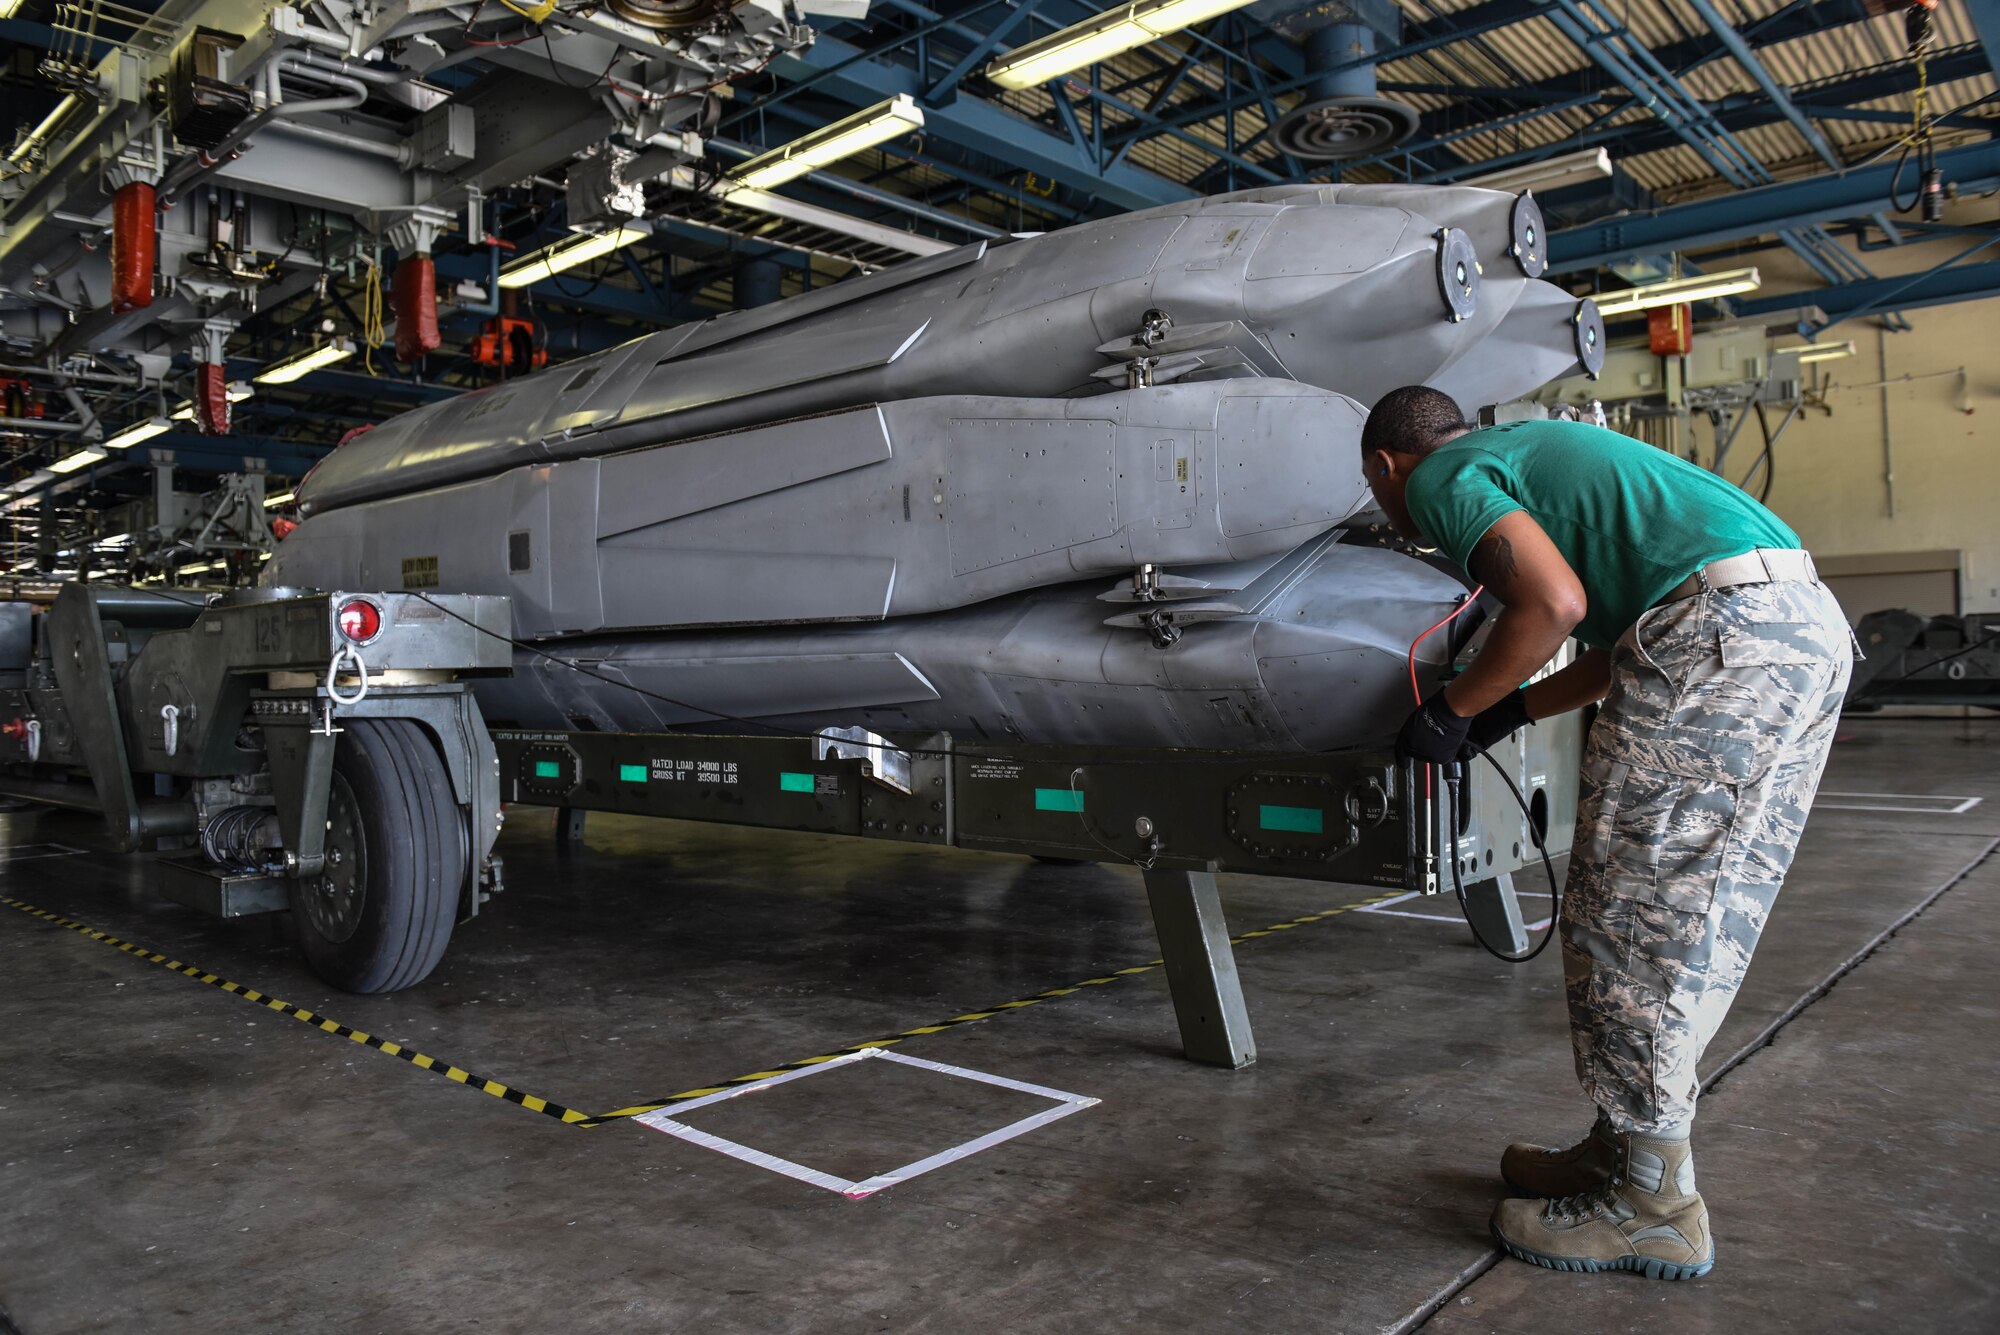 Senior Airman Terrance Jackson, assigned to the 2nd Munitions Squadron, guides a trailer around a missile rotator as part of a challenge in Air Force Global Strike Challenge on Barksdale Air Force Base, La., June 12, 2017. All four Airmen on the team were trained to do each of the tasks making the jobs interchangeable. (U.S. Air Force Photo/Airman 1st Class Sydney Bennett)